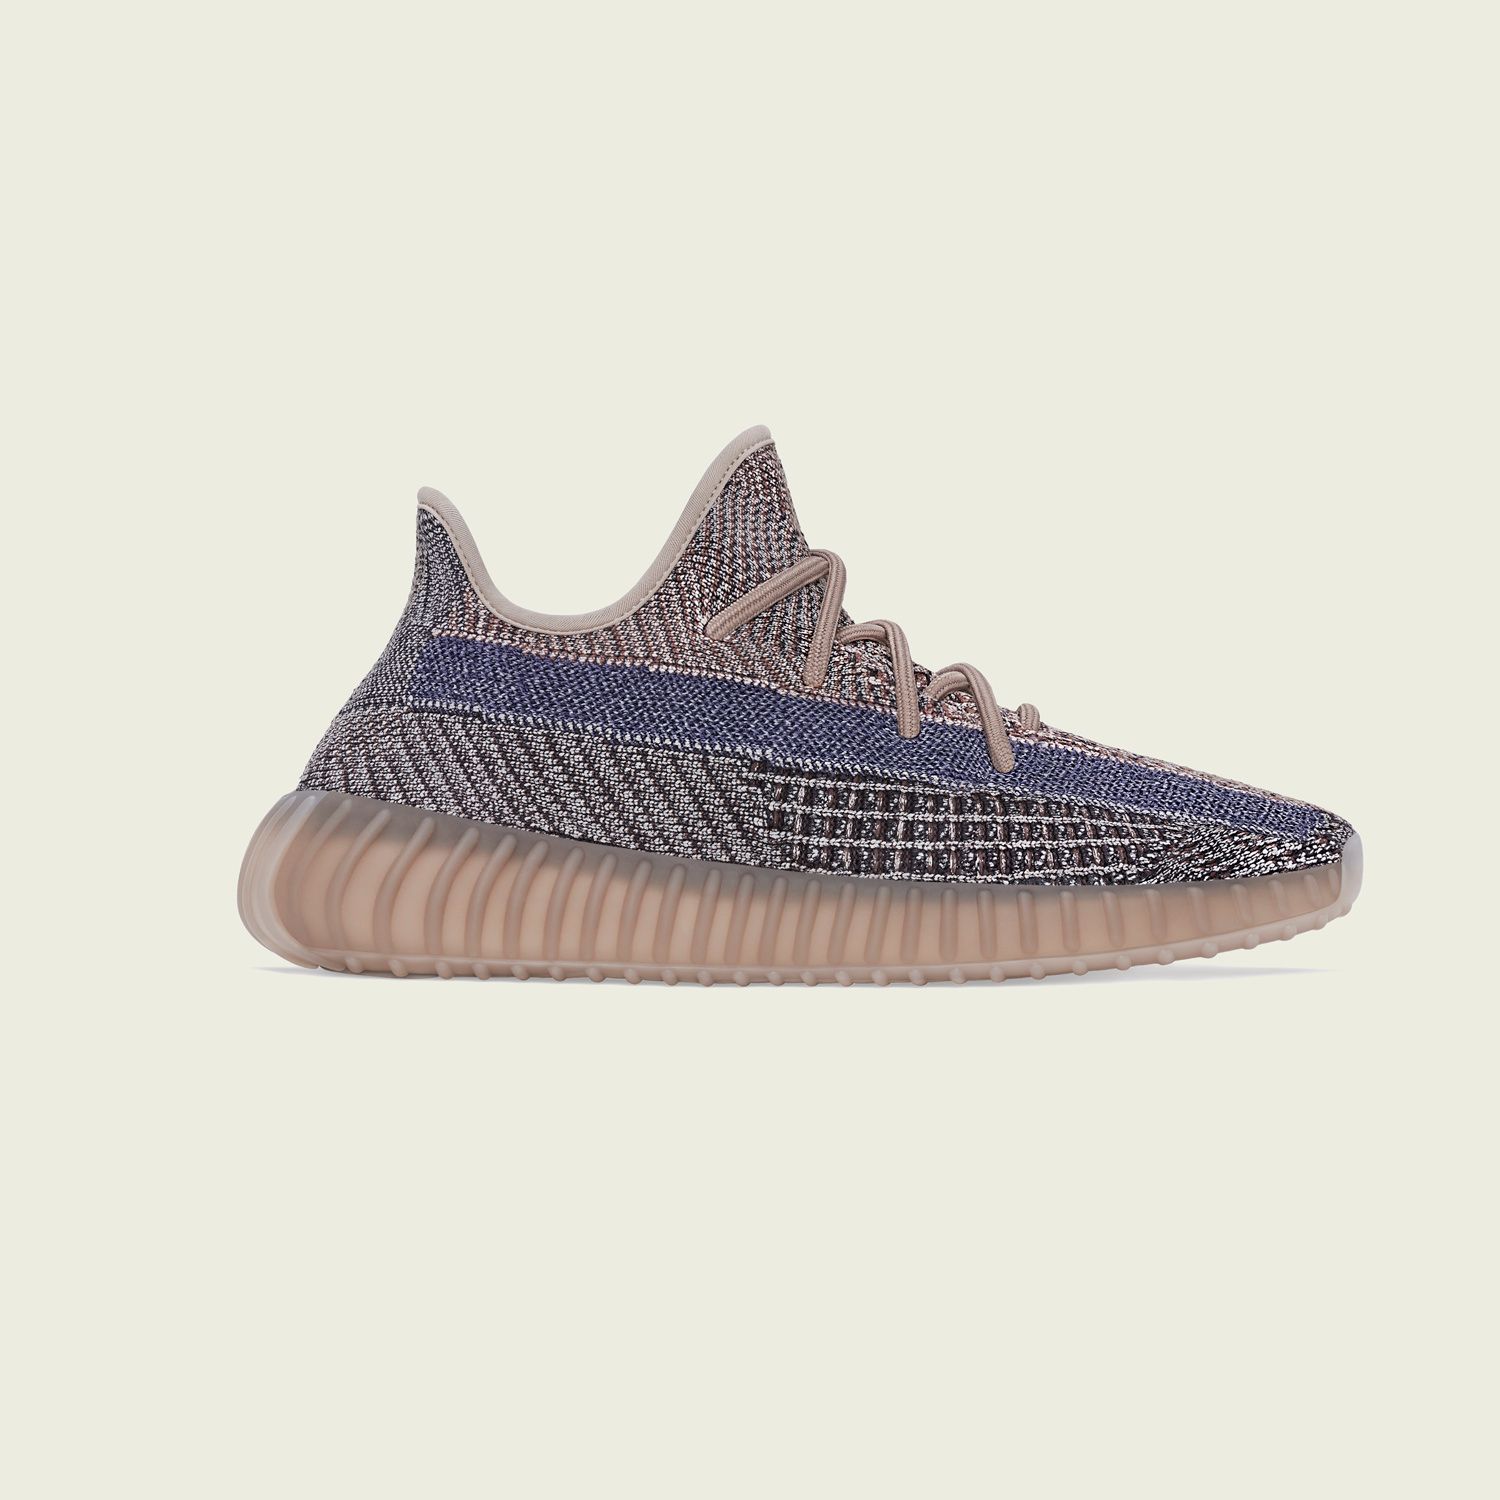 How to Cop adidas Yeezy Boost 350 V2 Fade Raffles & Release Links